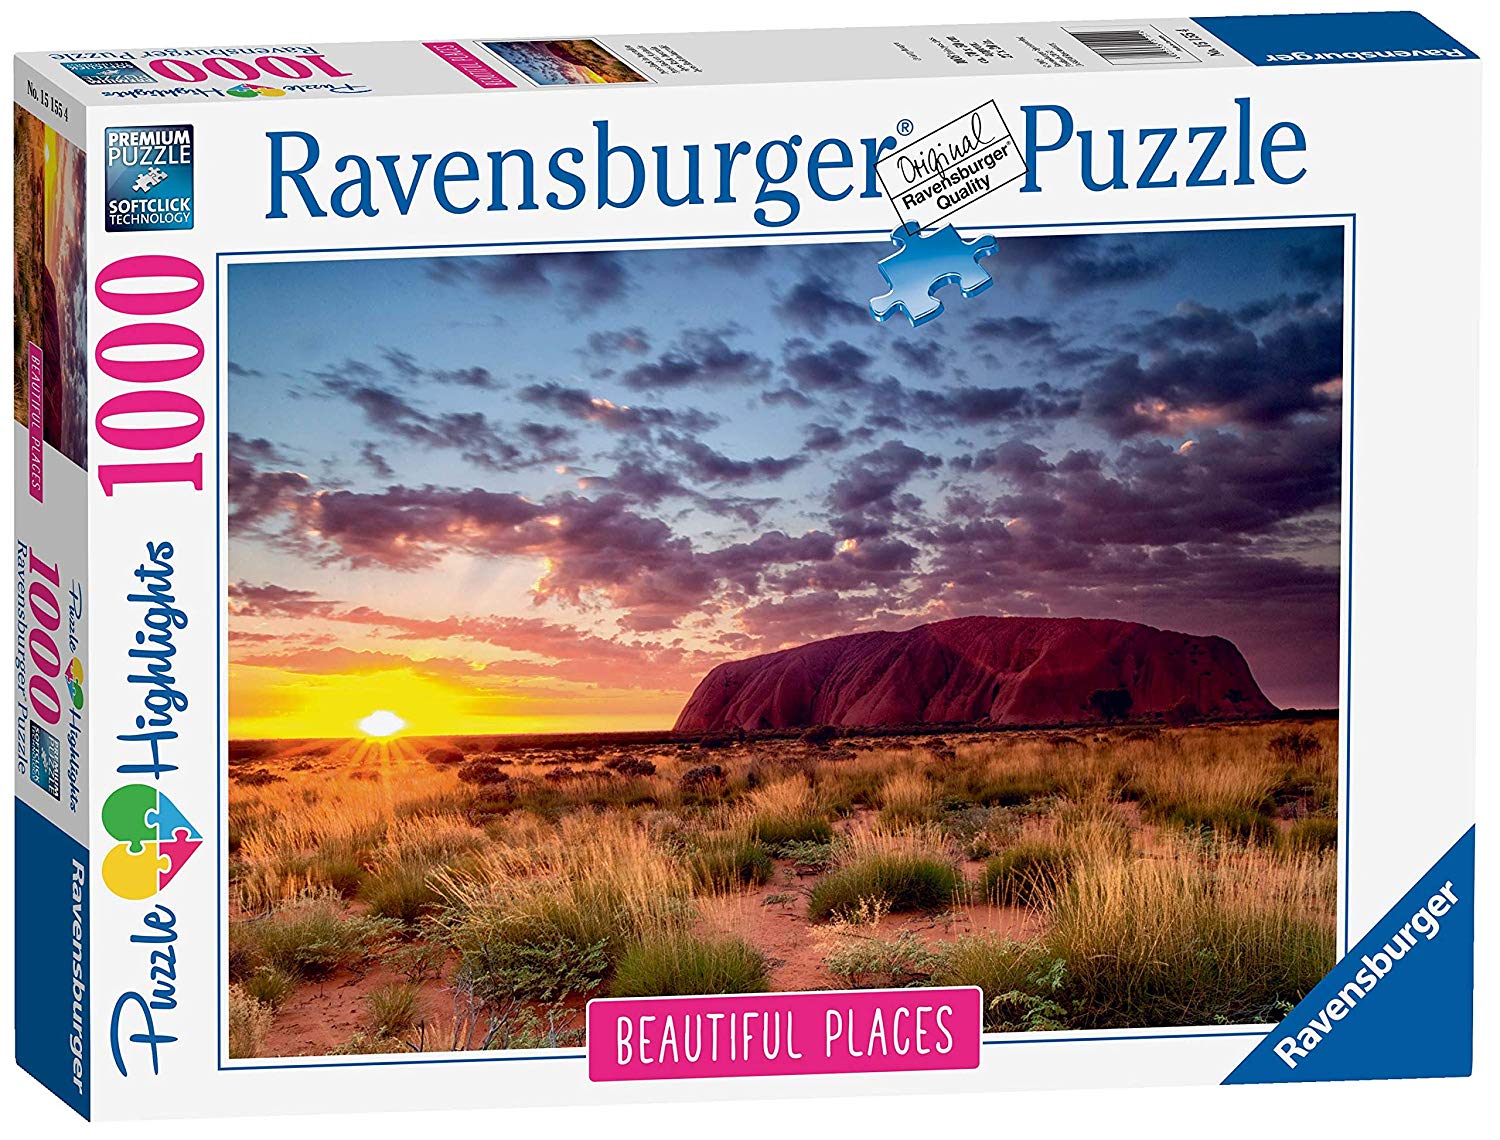 Ravensburger Jigsaw Puzzle for Adults 15155 Ayers Rock in Australia – Compl